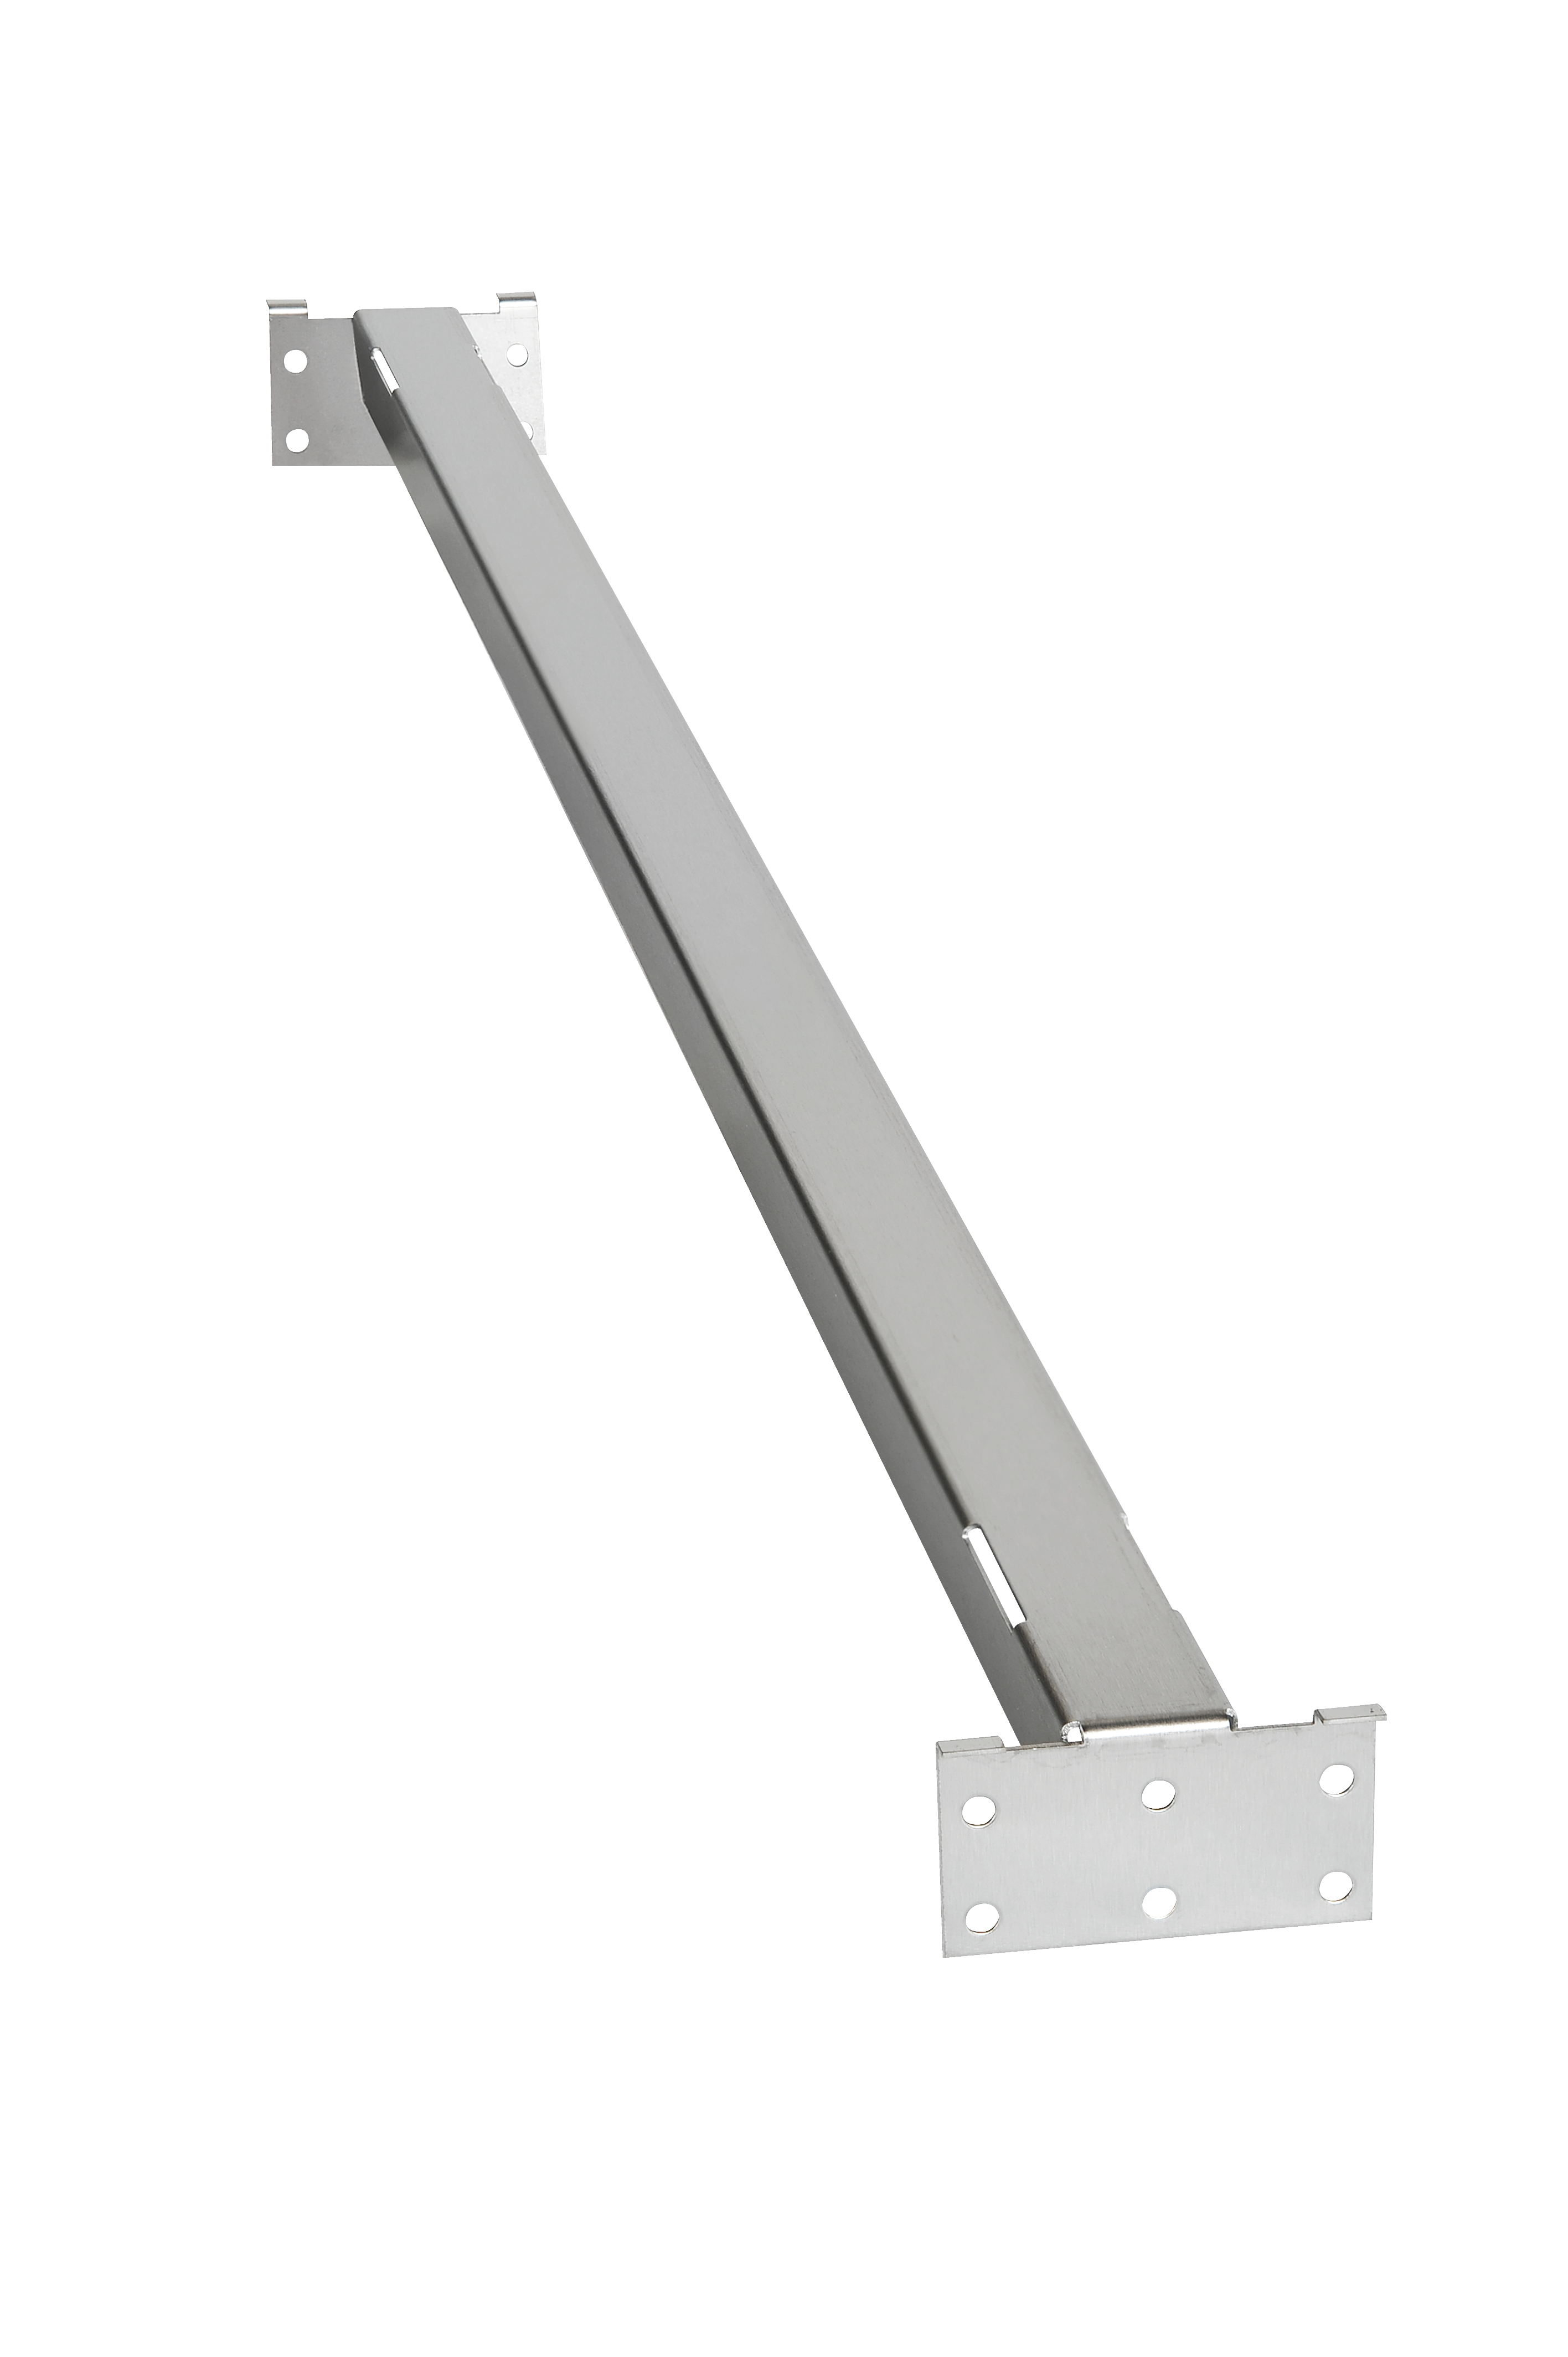 CSZL 7000Spacer strip for installing several SmartLine elements in one single cut-out.